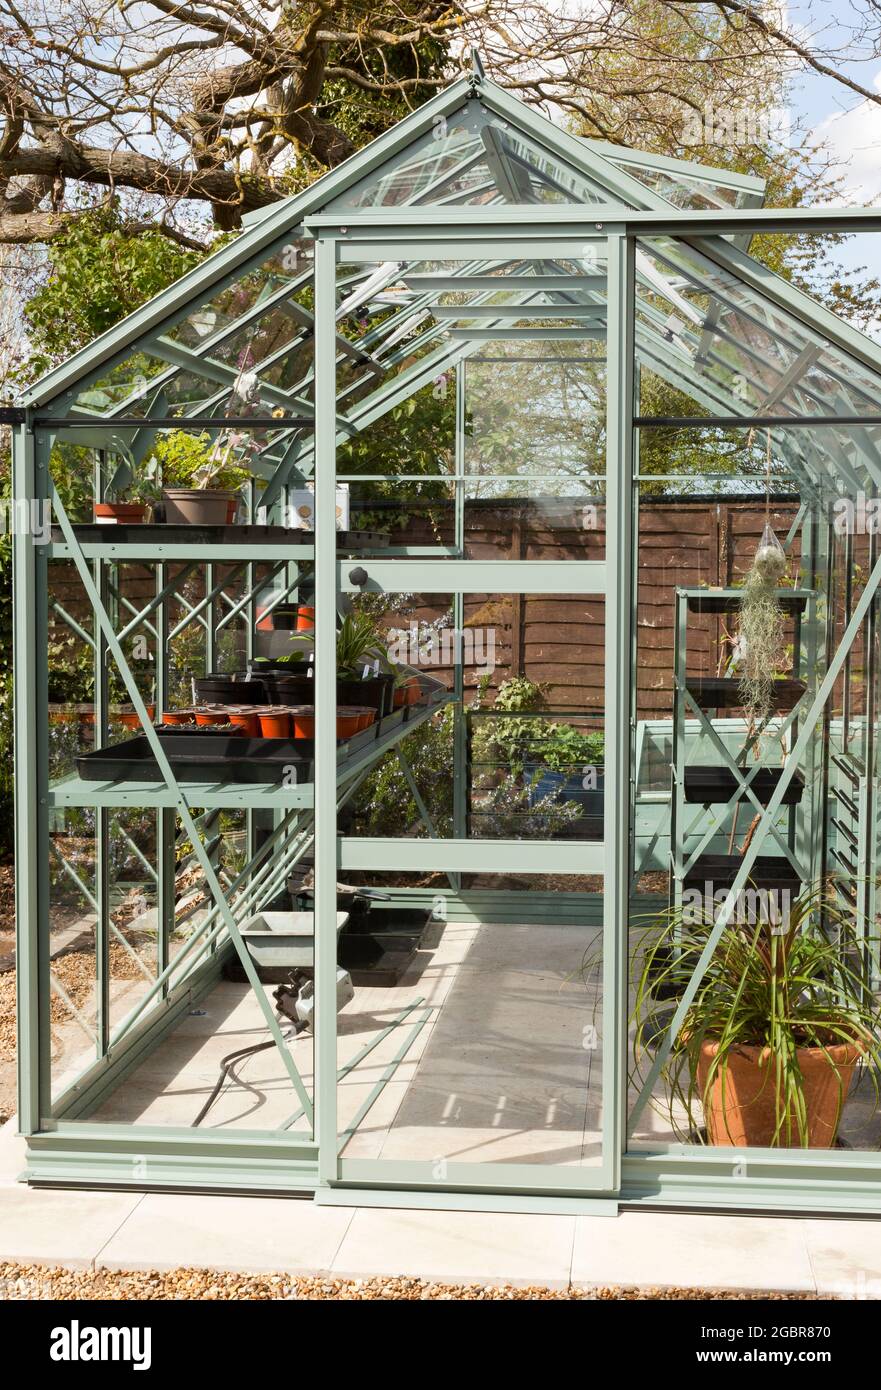 Exterior of a metal greenhouse in Spring Stock Photo